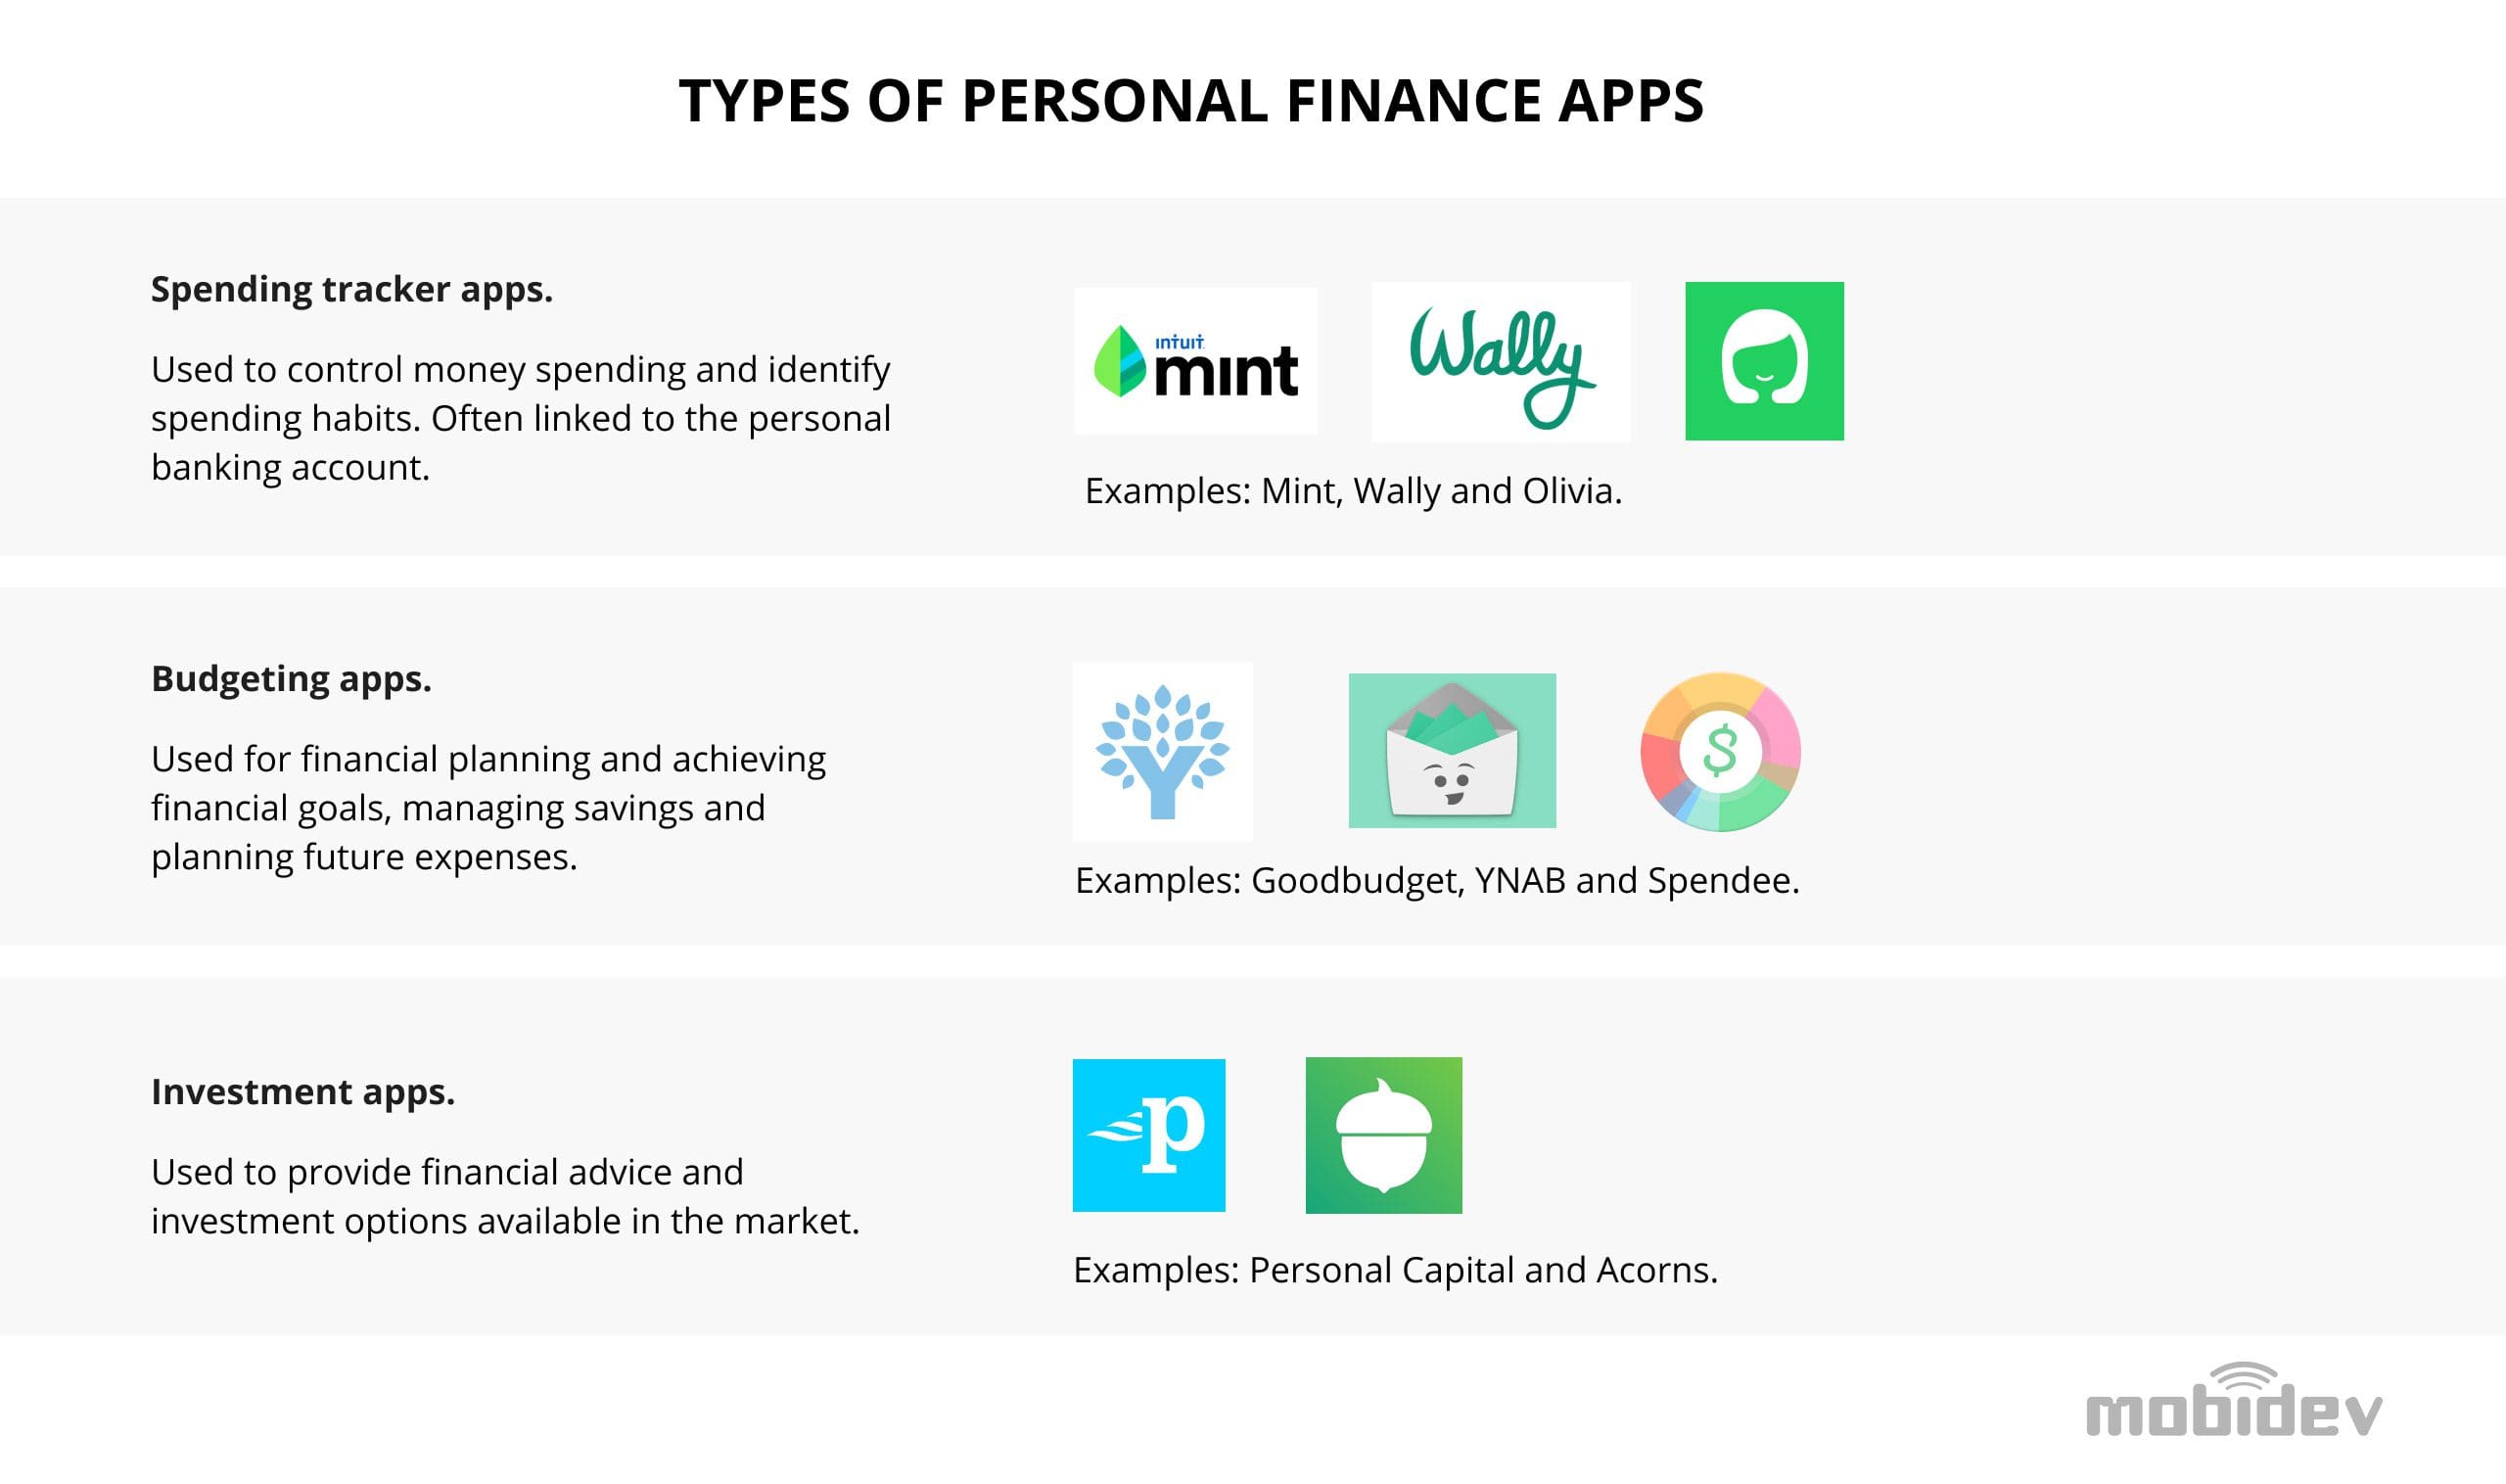 Types of personal finance apps 